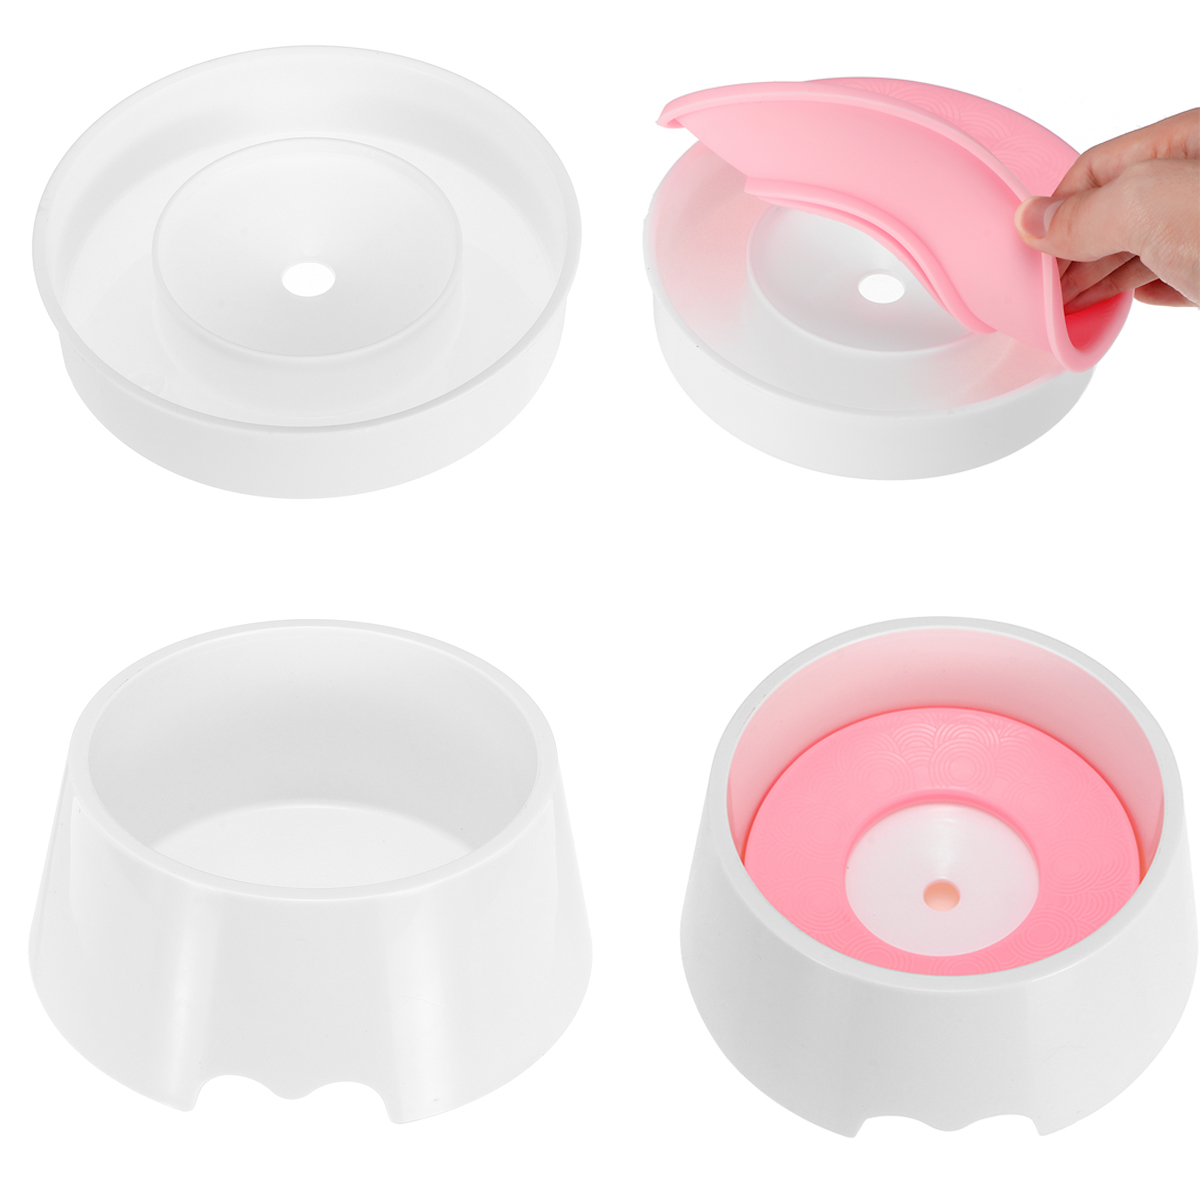 No-Wet-Mouth-and-Splash-Proof-Pet-Feeding-Puppy-Travel-Animal-Water-Bowl-1439667